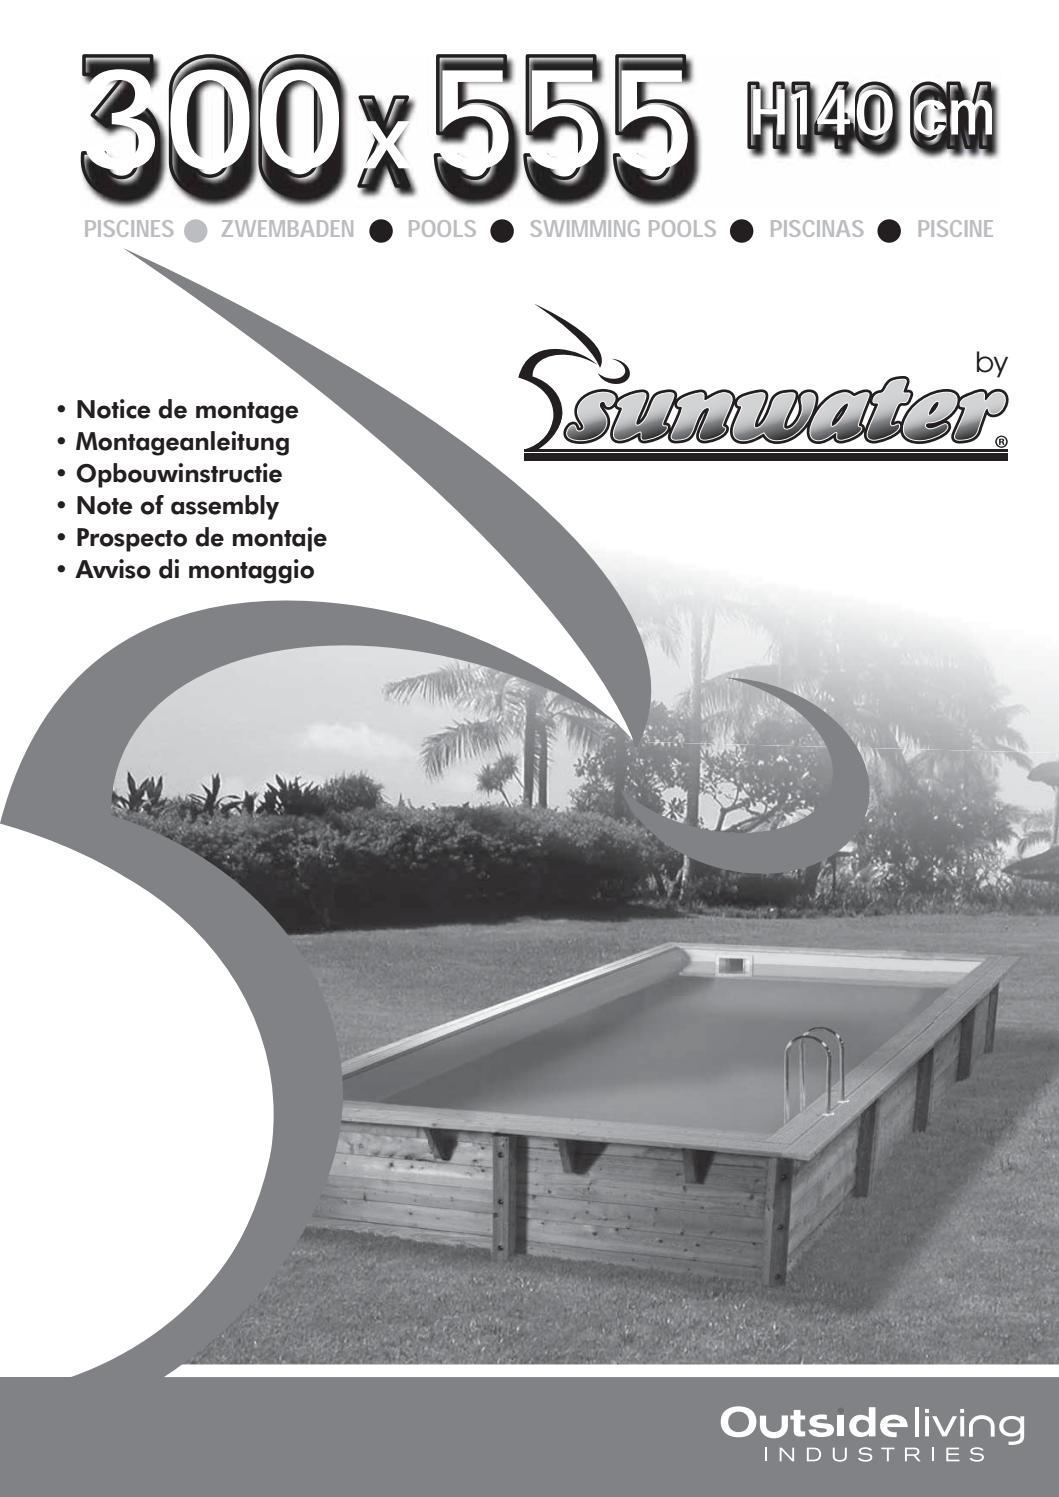 Notice 300X555 H140 2018 By ____ - Issuu concernant Filtre A Sable Piscine Mode D Emploi